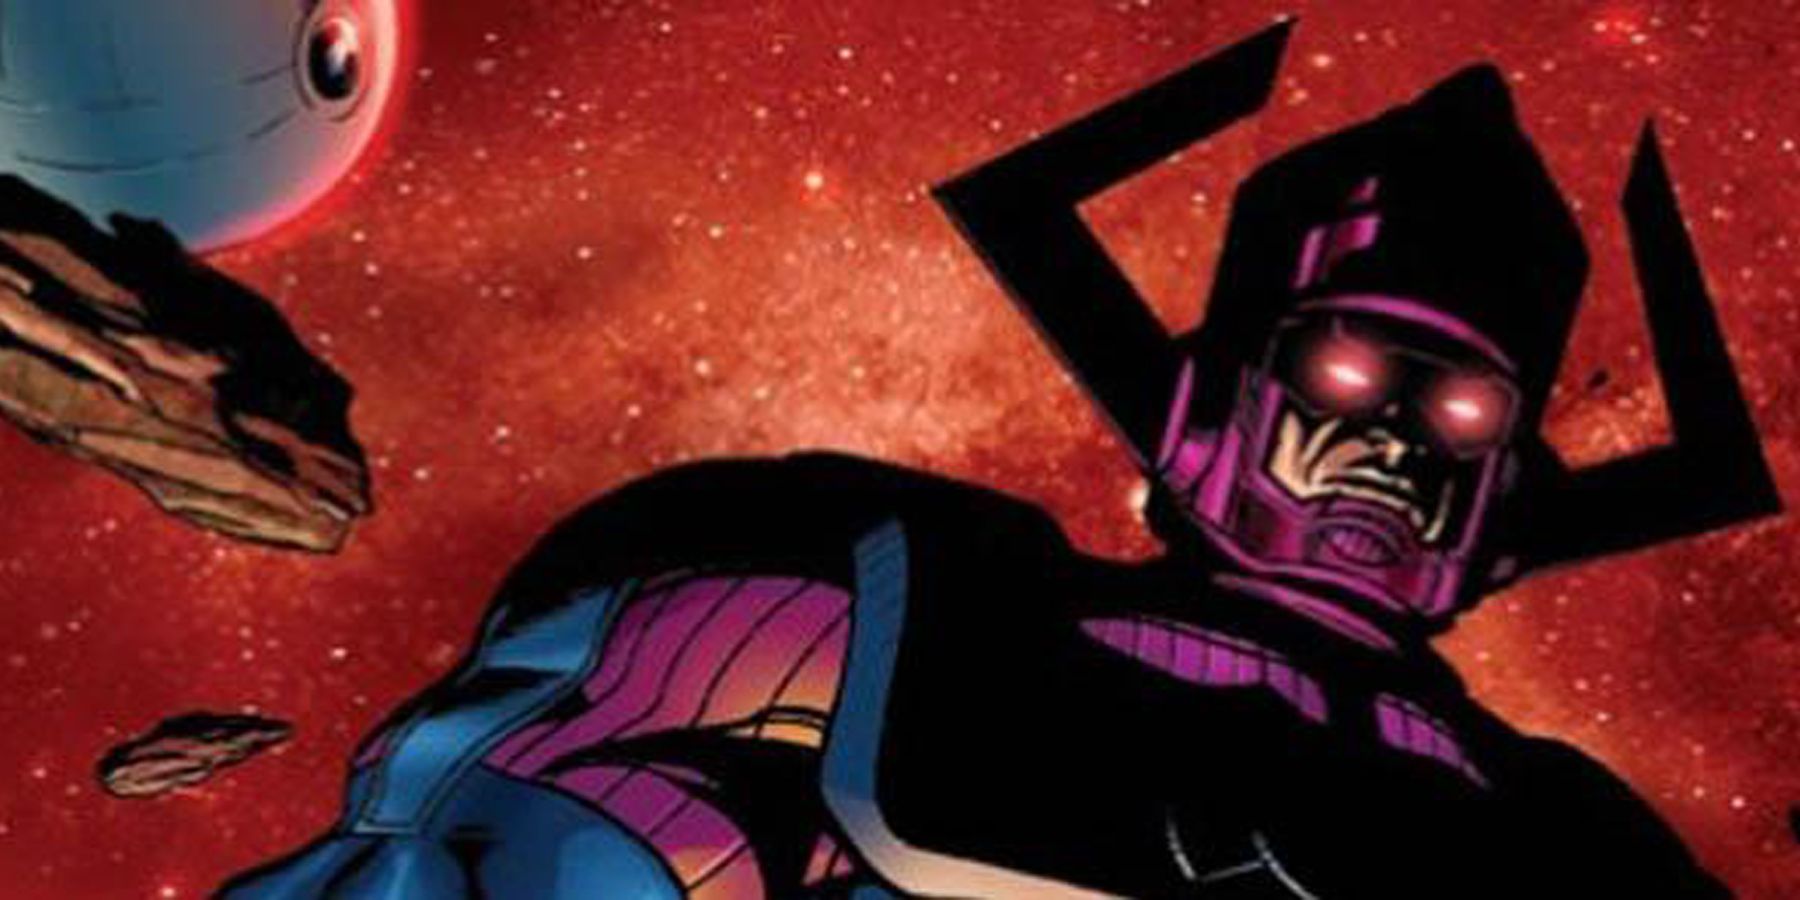 Galactus with glowing eyes in Marvel Comics